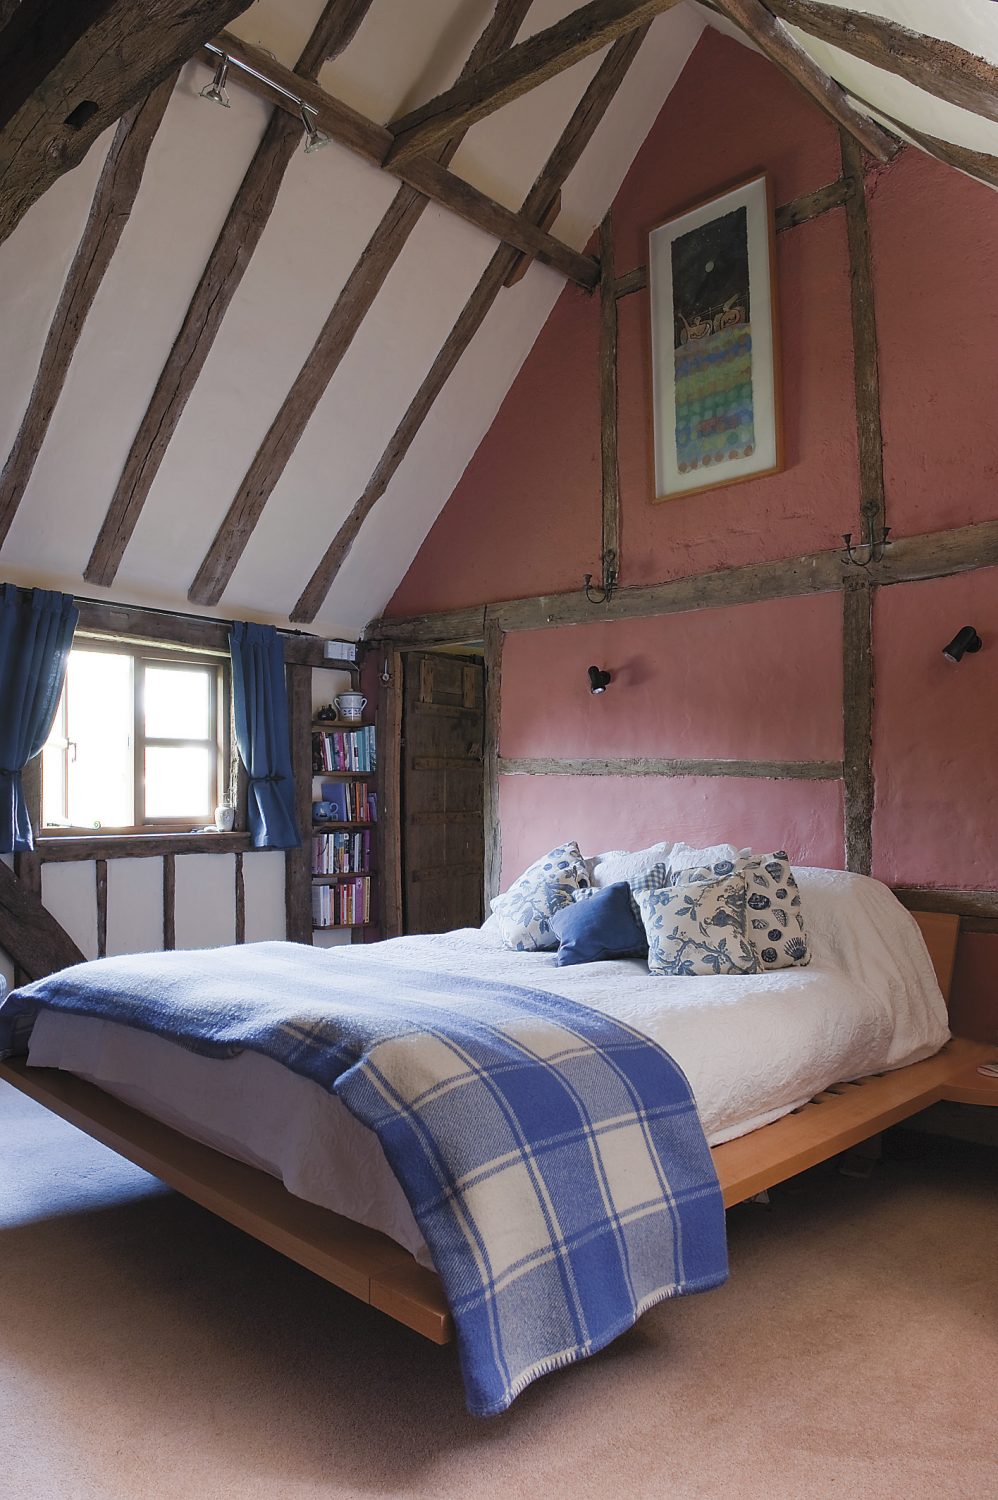 and so to sleep...the magnificent vaulted bedroom is a gem, with exposed timber, the fireplace and wobbly floor